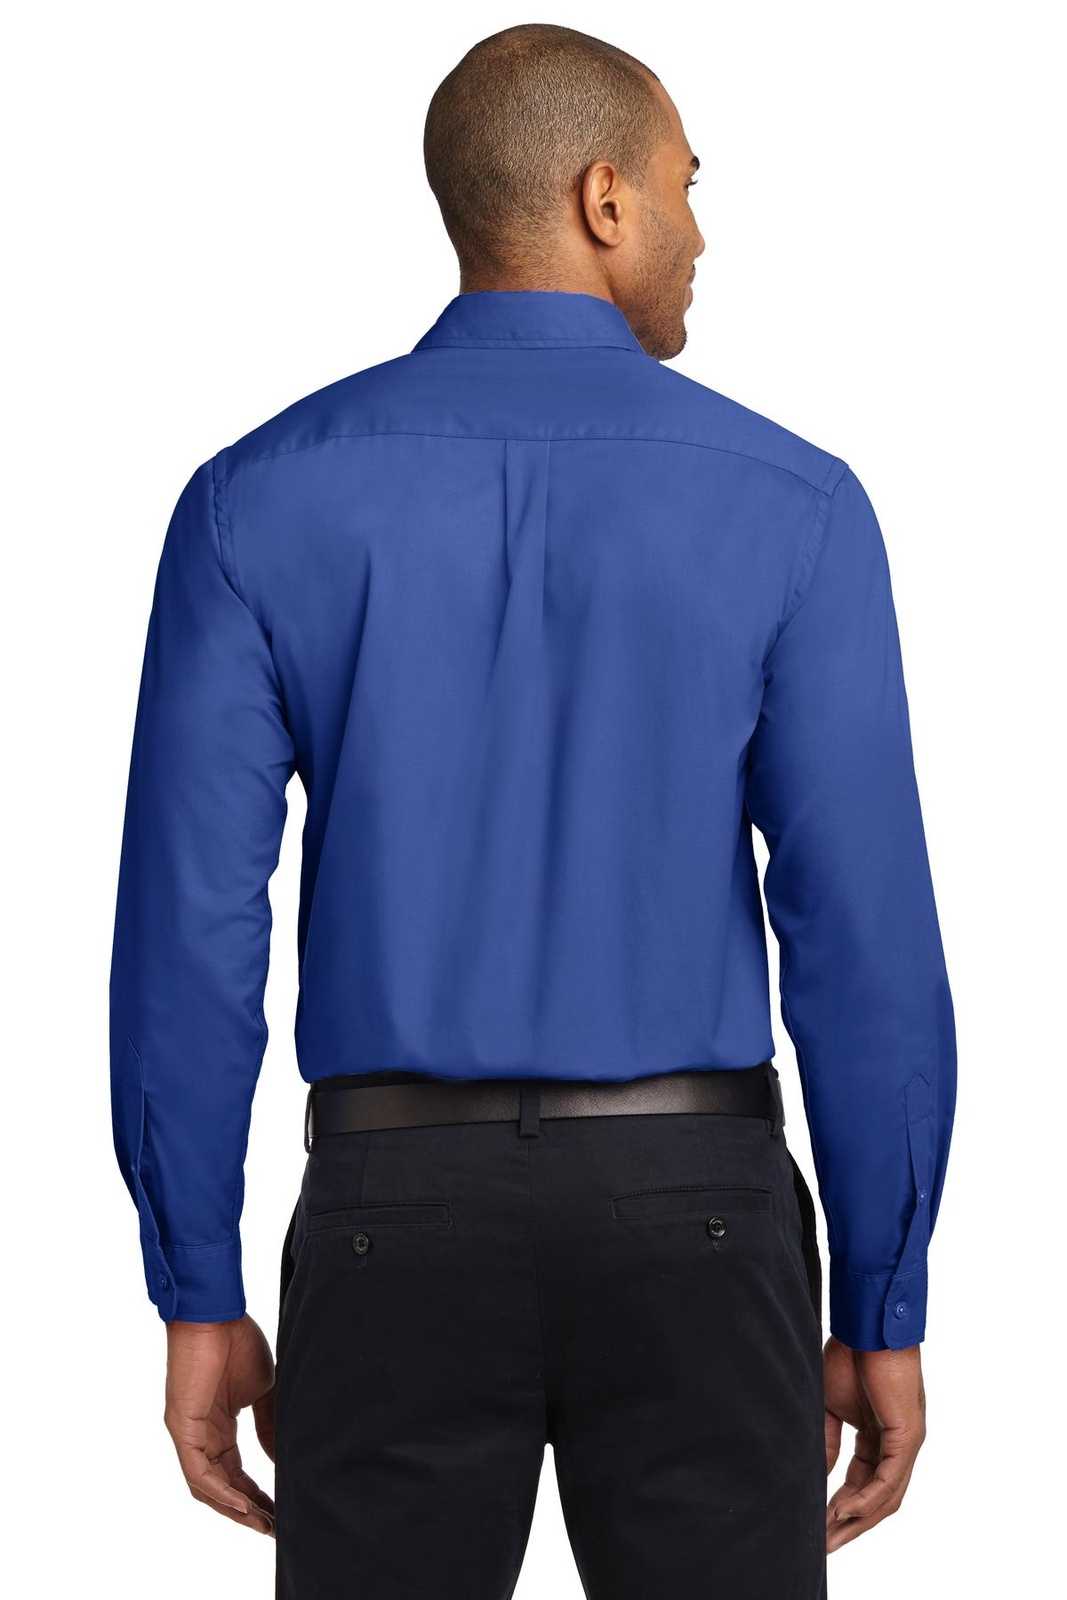 Port Authority S608 Long Sleeve Easy Care Shirt - Royal Classic Navy - HIT a Double - 1